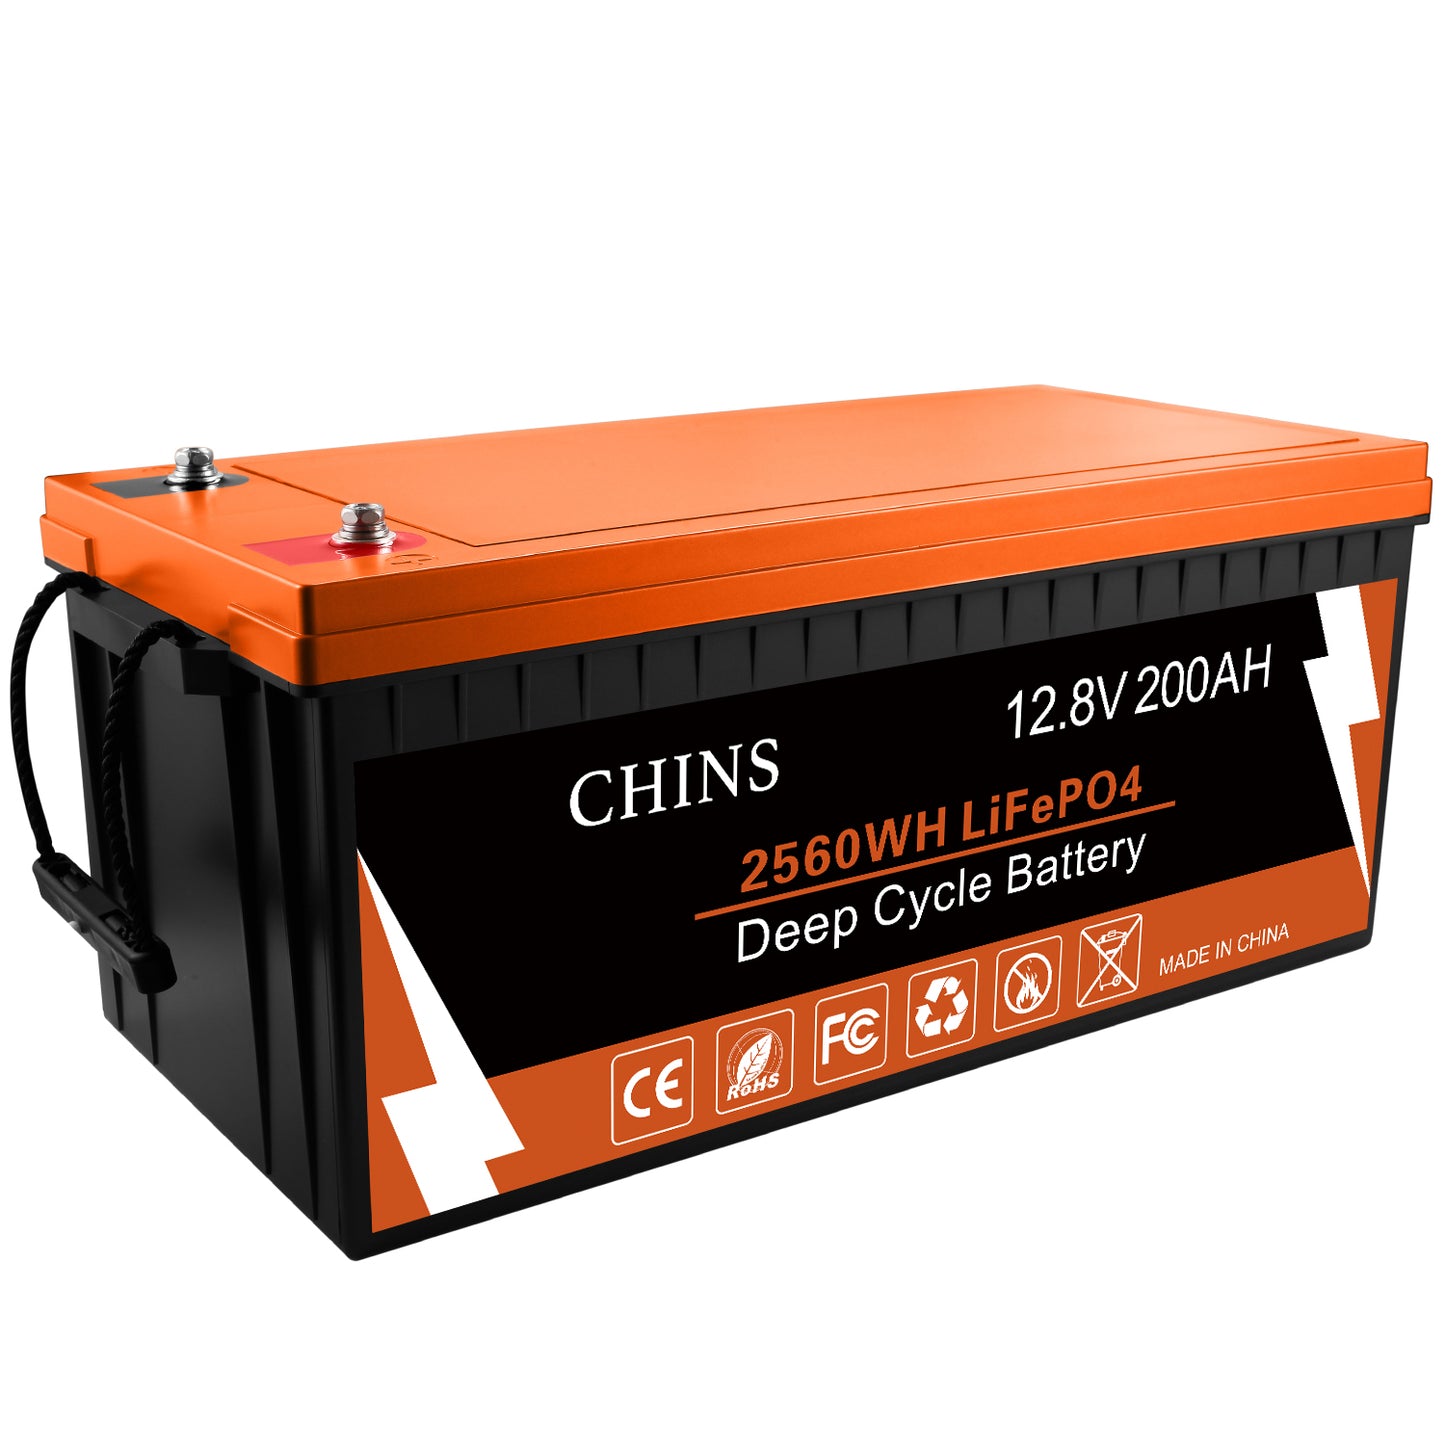 CHINS Smart 12.8V 200Ah LiFePO4 Lithium Battery, Support Low Temperatu –  CHINS-Battery